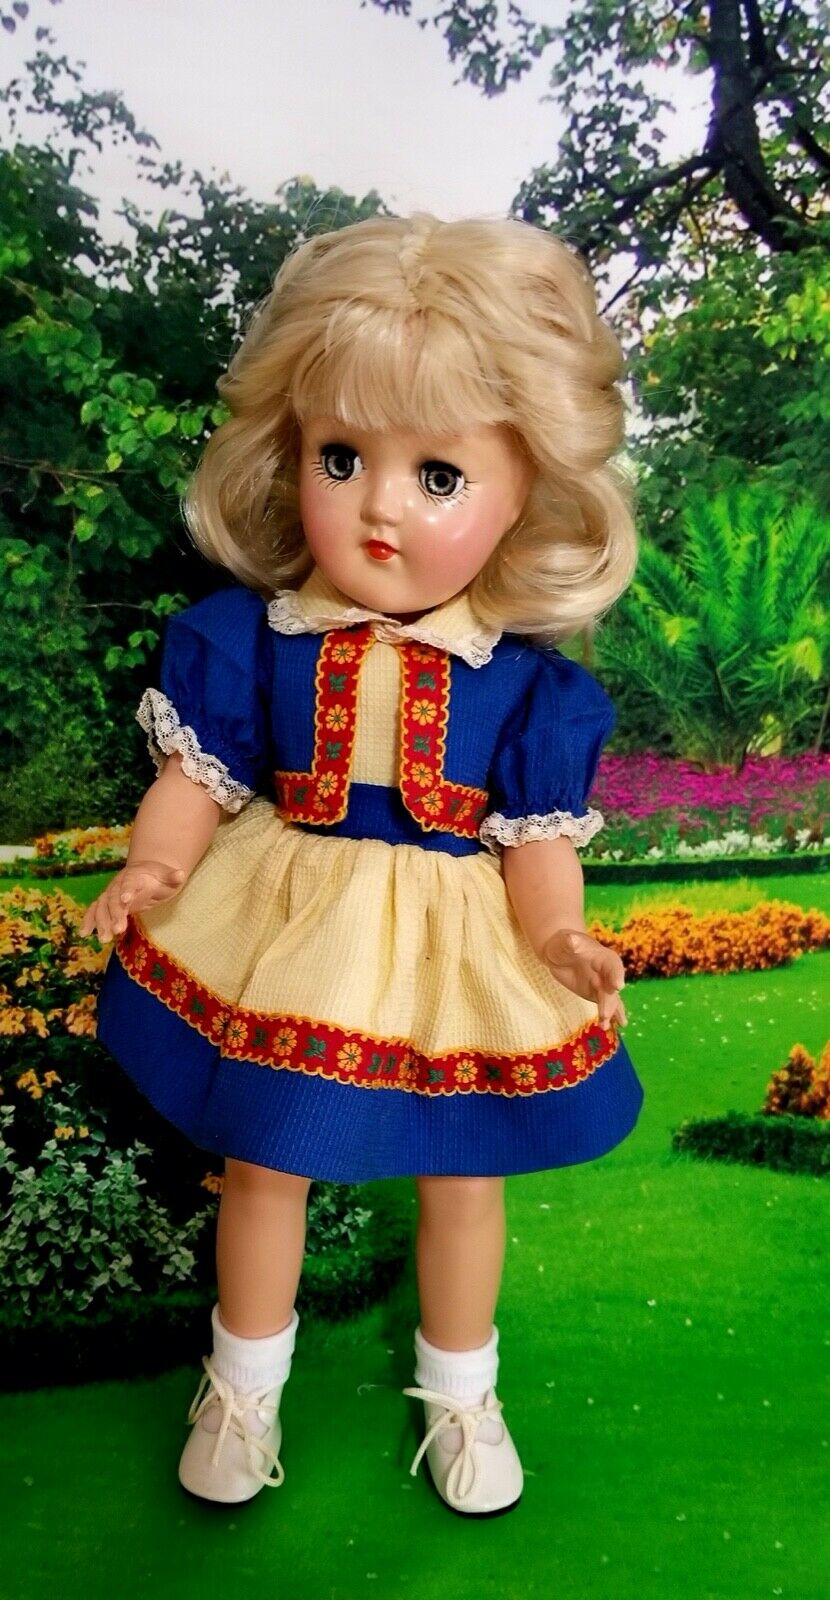 Ideal 14" Toni~p90~blonde Doll In Original Blue And Cream Dress~very Sweet